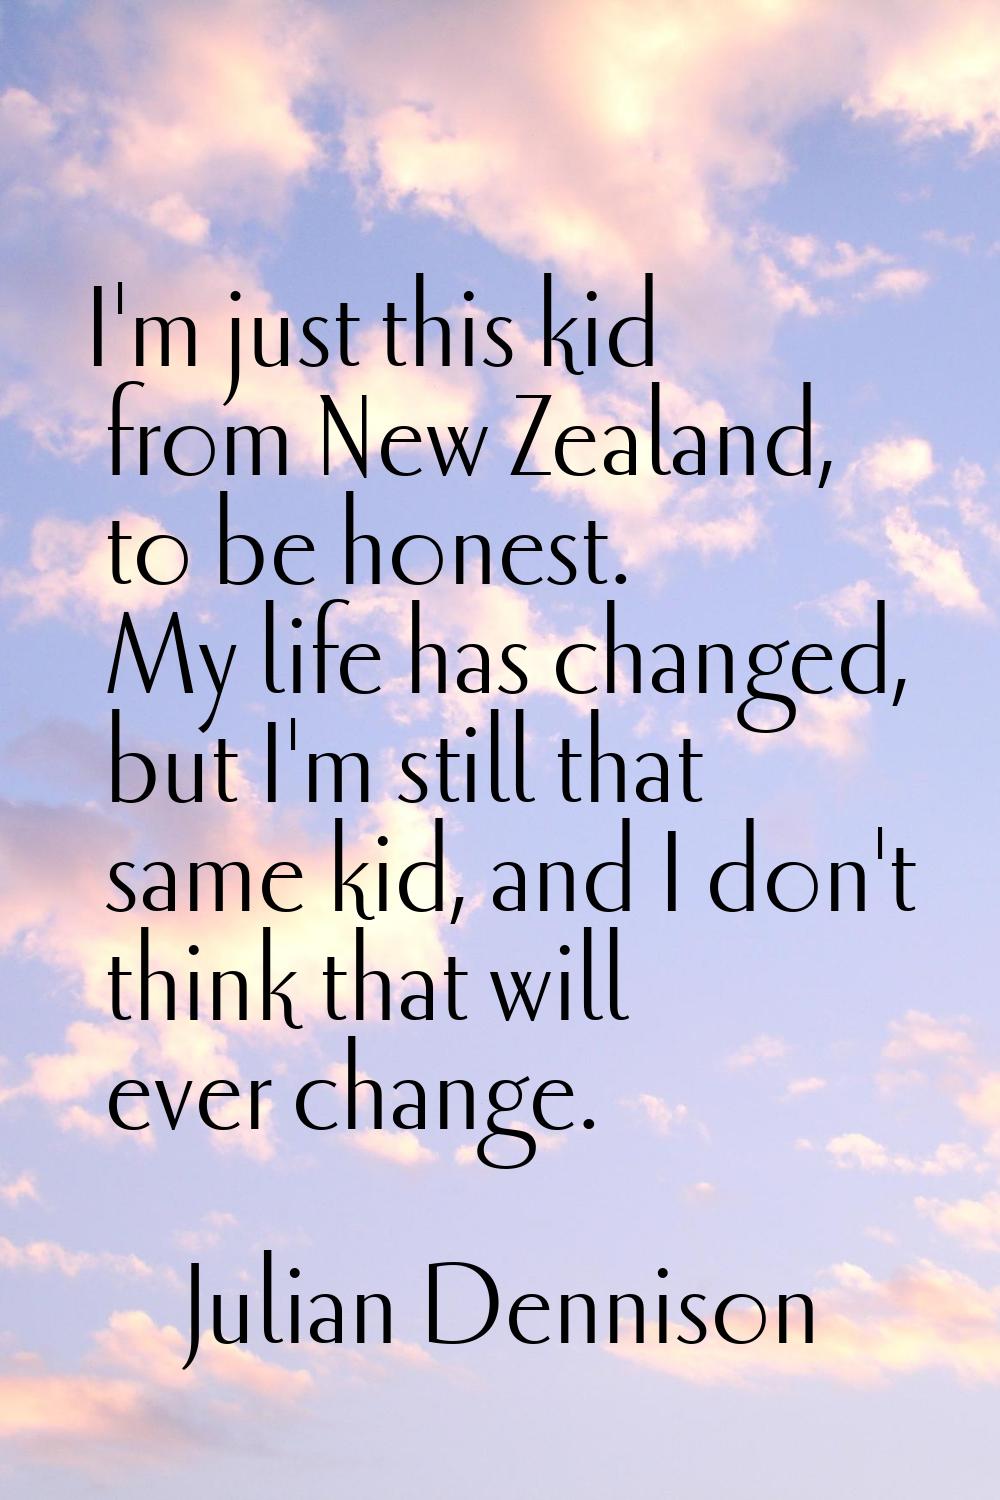 I'm just this kid from New Zealand, to be honest. My life has changed, but I'm still that same kid,